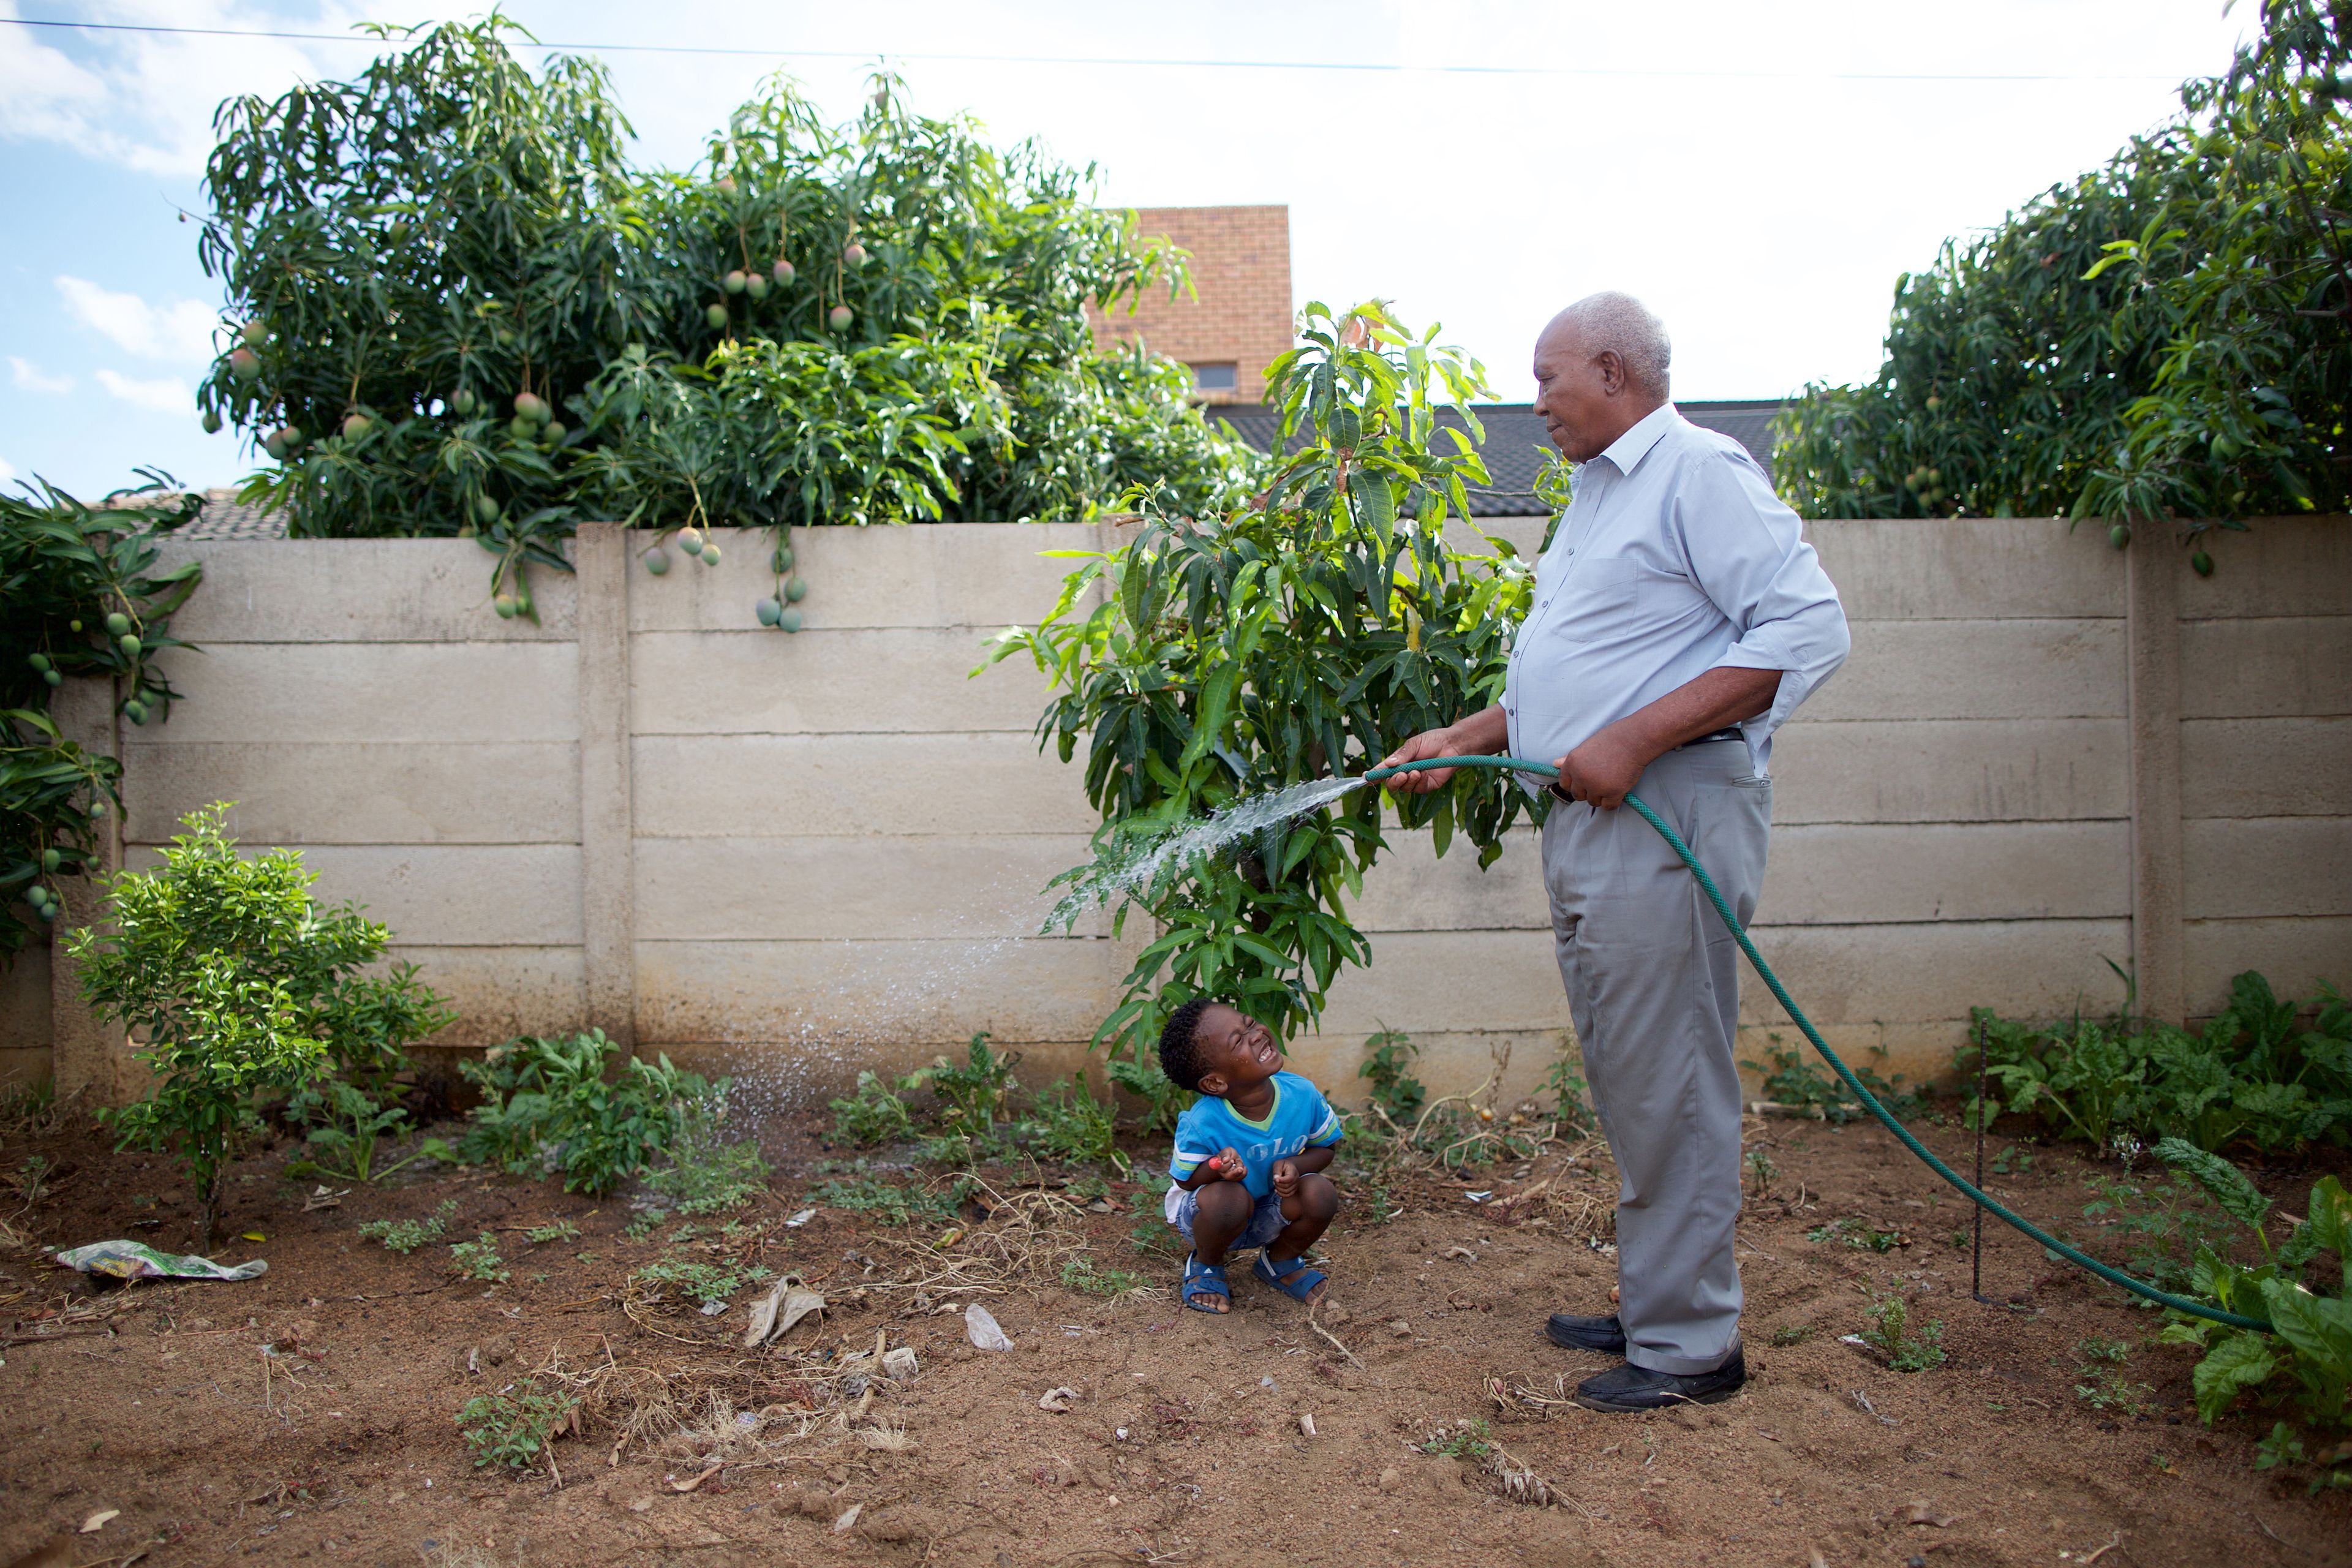 A grandfather and his grandson work and play together in their garden in South Africa.